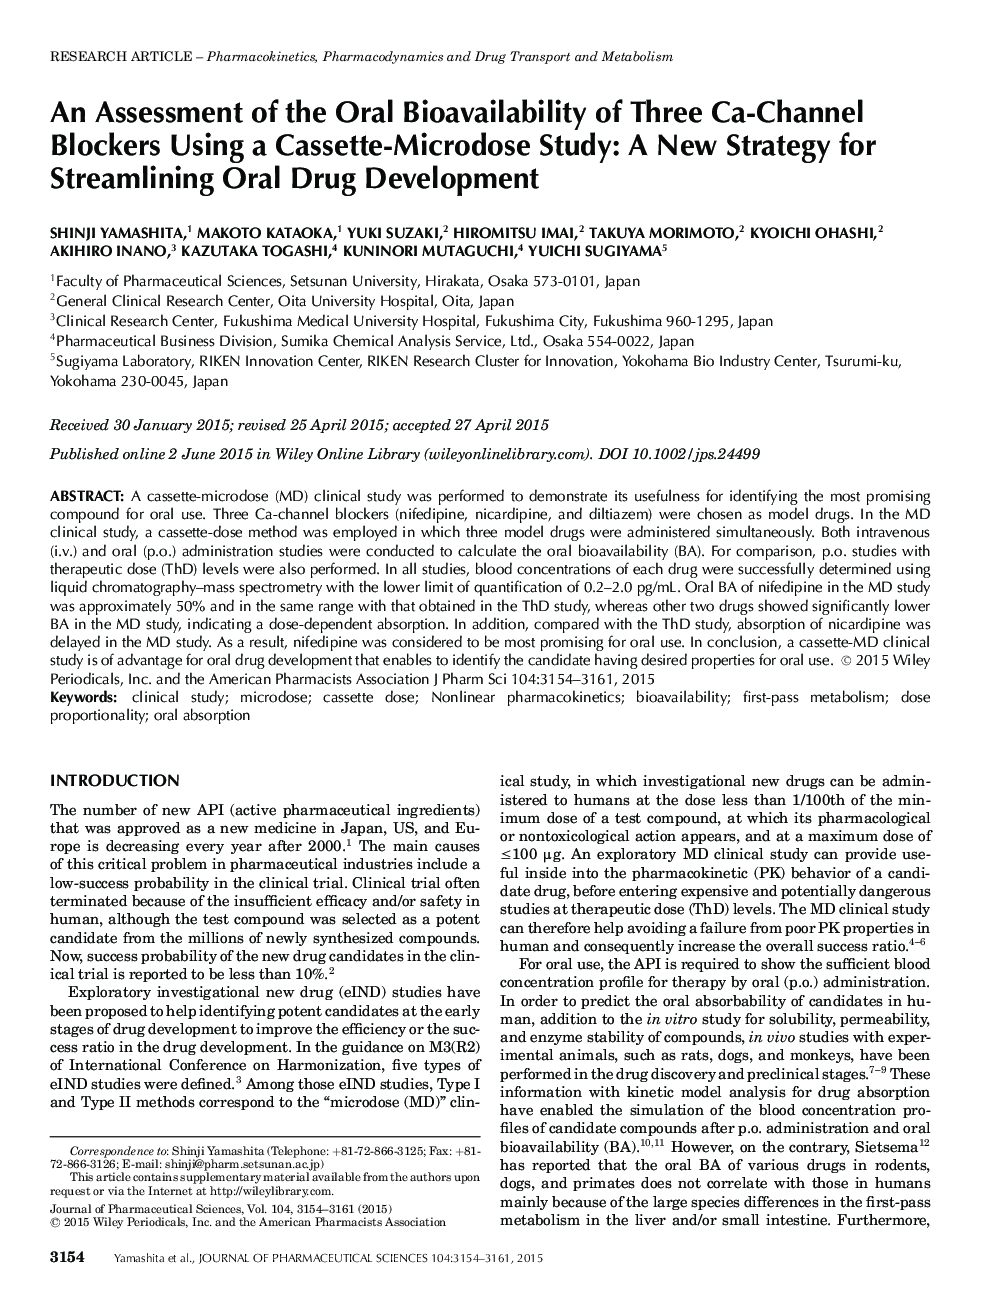 An Assessment of the Oral Bioavailability of Three Ca-Channel Blockers Using a Cassette-Microdose Study: A New Strategy for Streamlining Oral Drug Development 